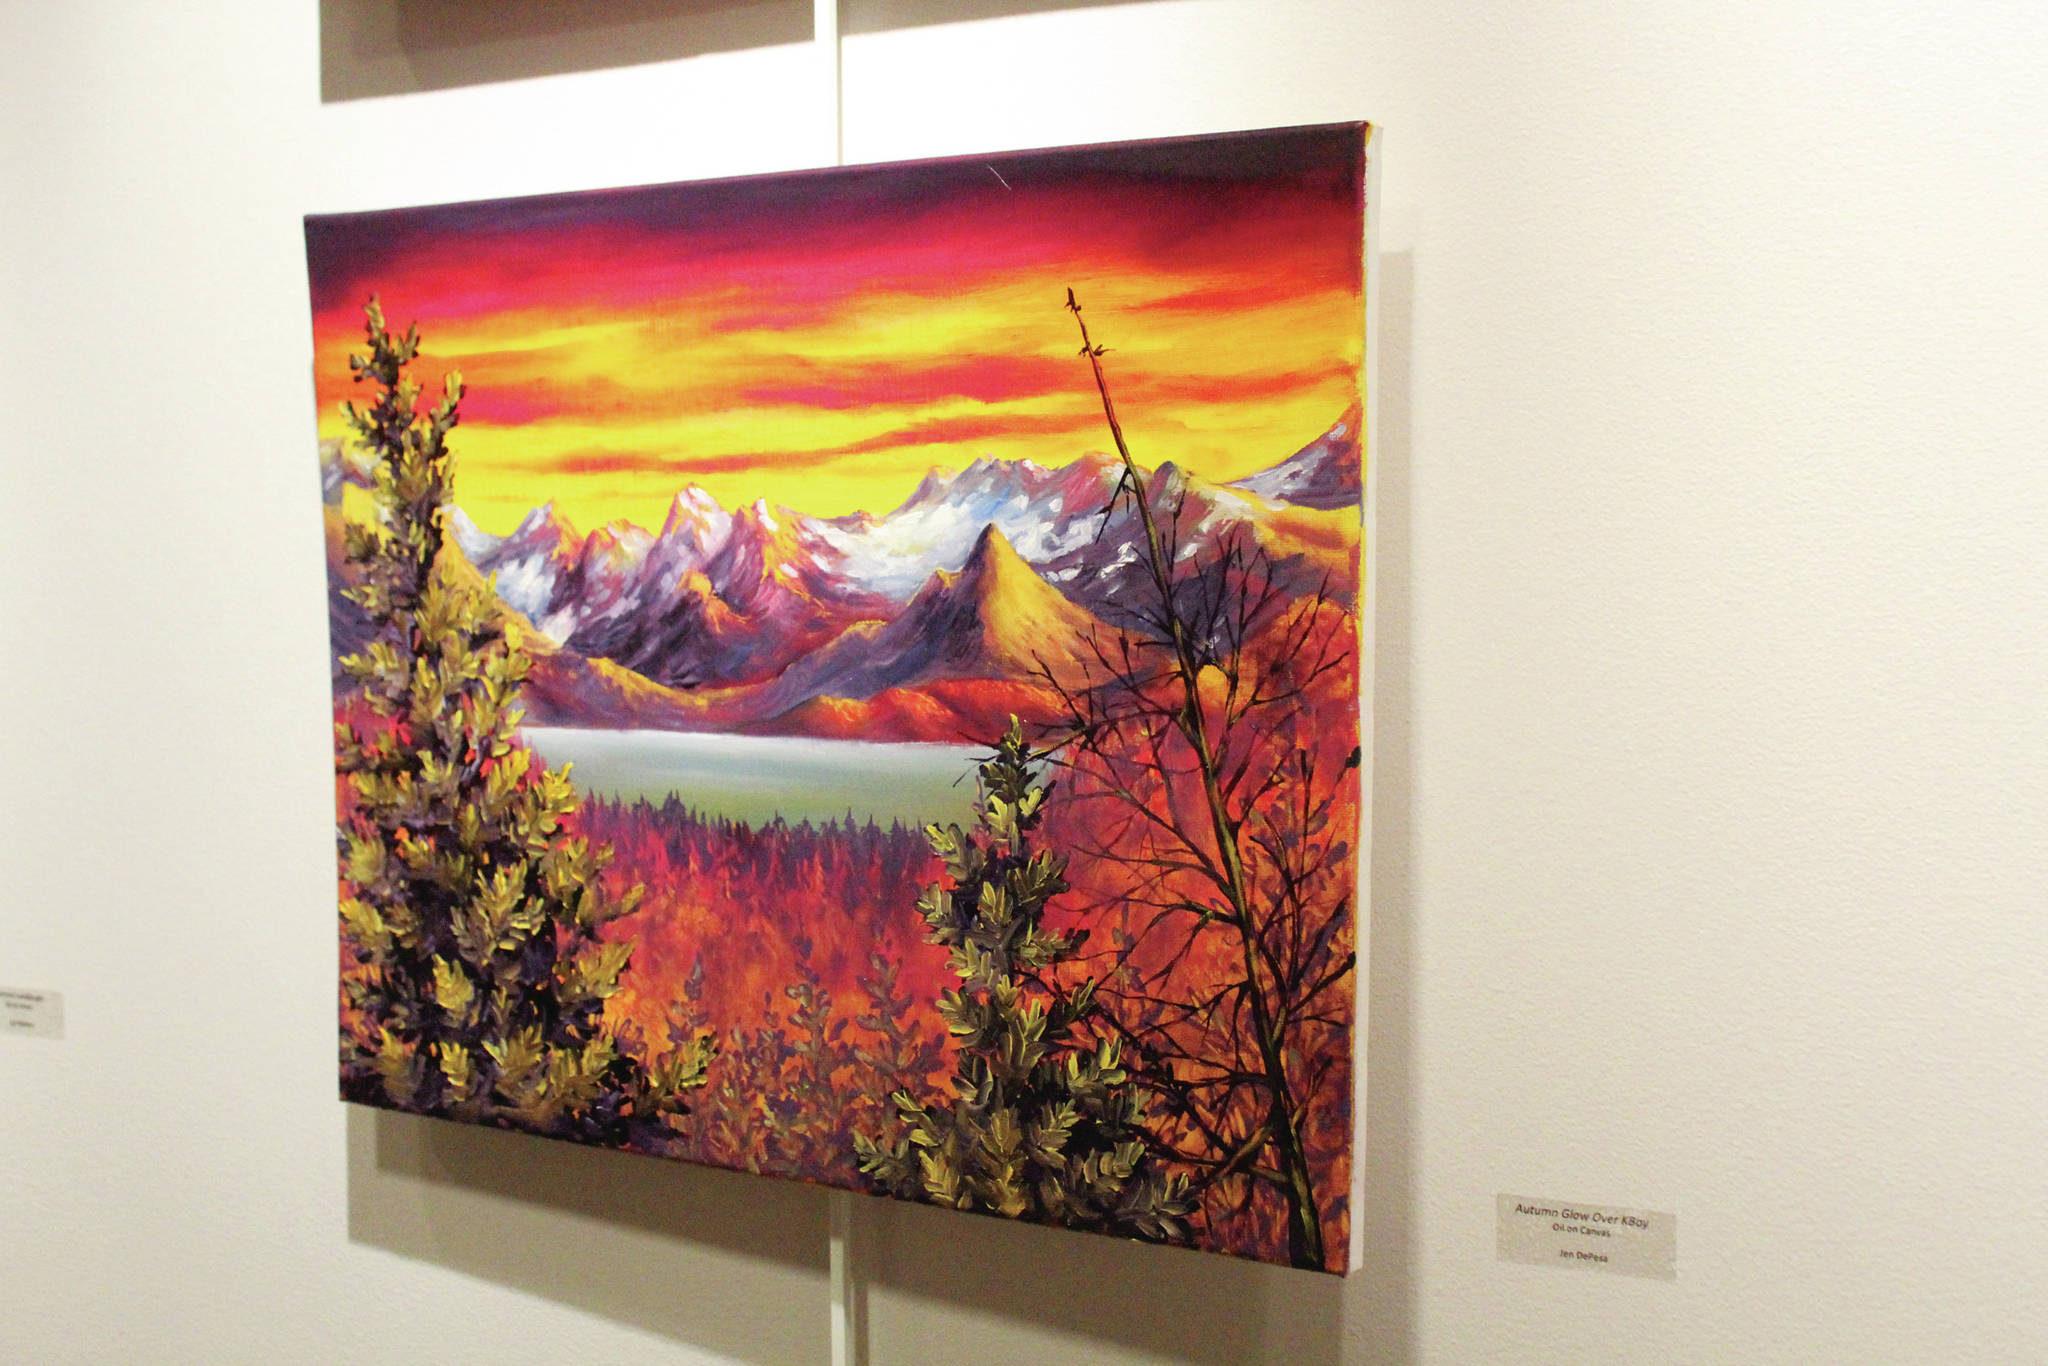 An oil painting by Jen DePesa hangs on the wall during a First Friday art exhibit opening Friday, Nov. 1, 2019 at Kachemak Bay Campus in Homer, Alaska. The exhibit features art by students in a class taught at the college by Asia Freeman. (Photo by Megan Pacer/Homer News)